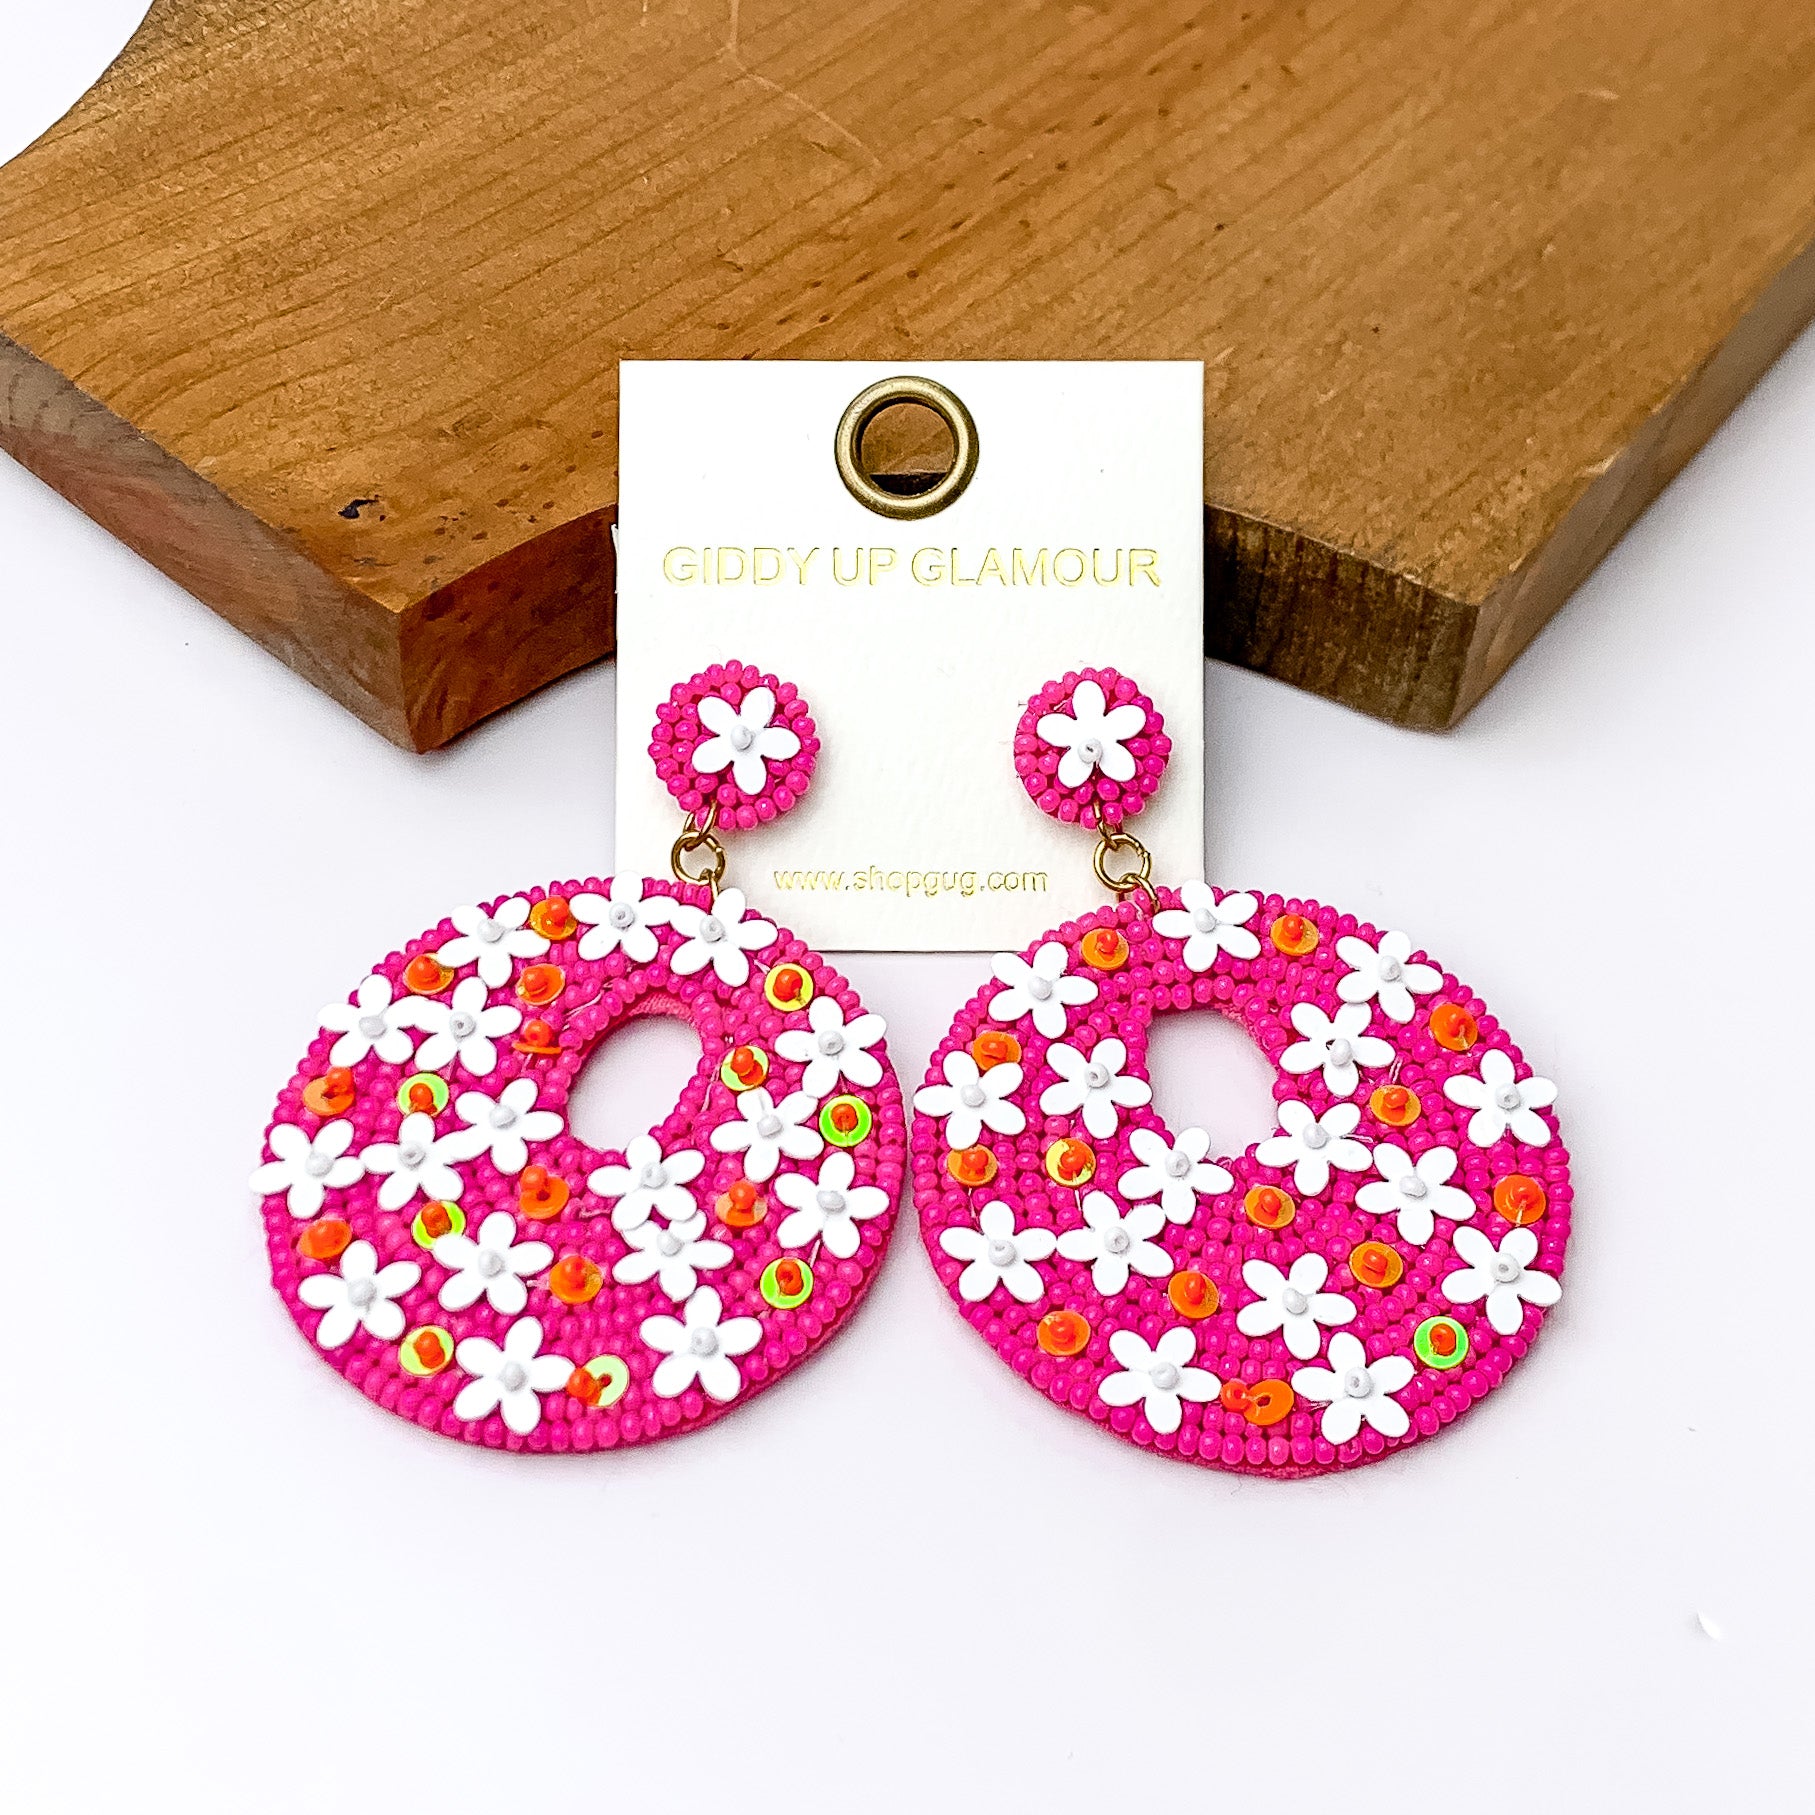 Hot pink beaded circular earrings with white and orange designs. Pictured on a white background with wood at the top.